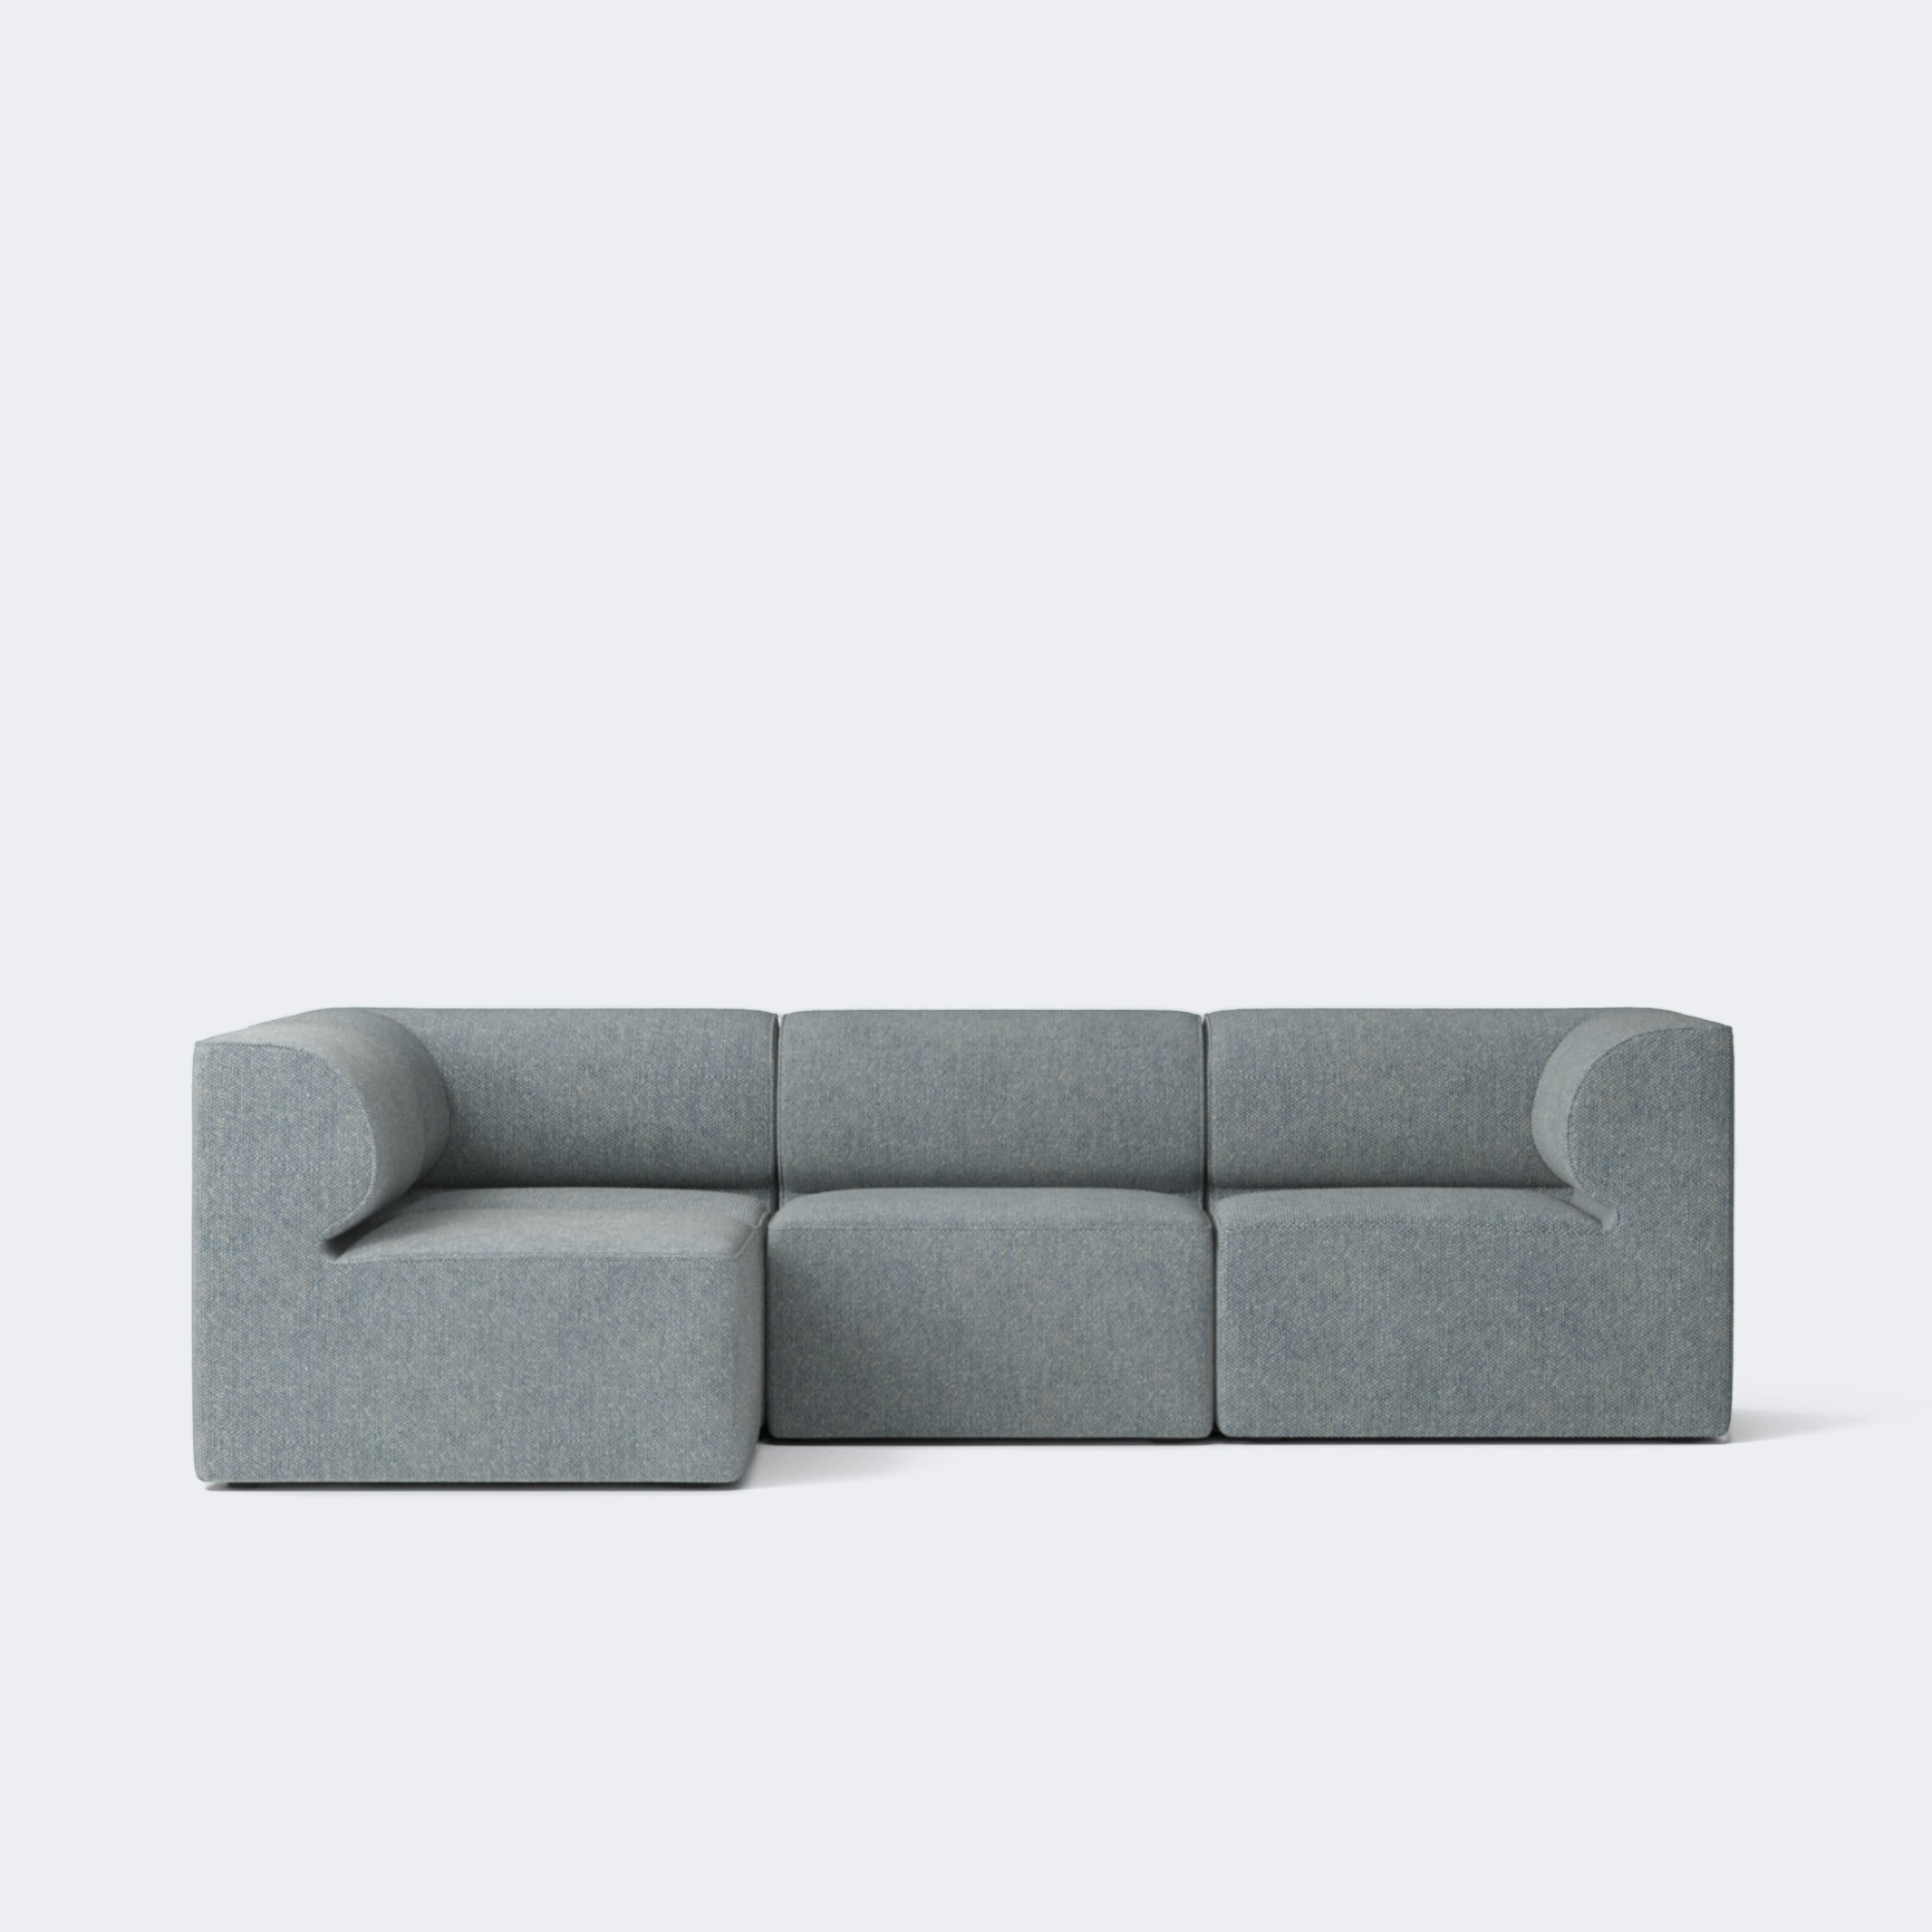 Audo Copenhagen Eave Sectional Sofa, 4-Seater Made To Order (10-12 Weeks) 4-Seater | Left Section Safire #012 - KANSO